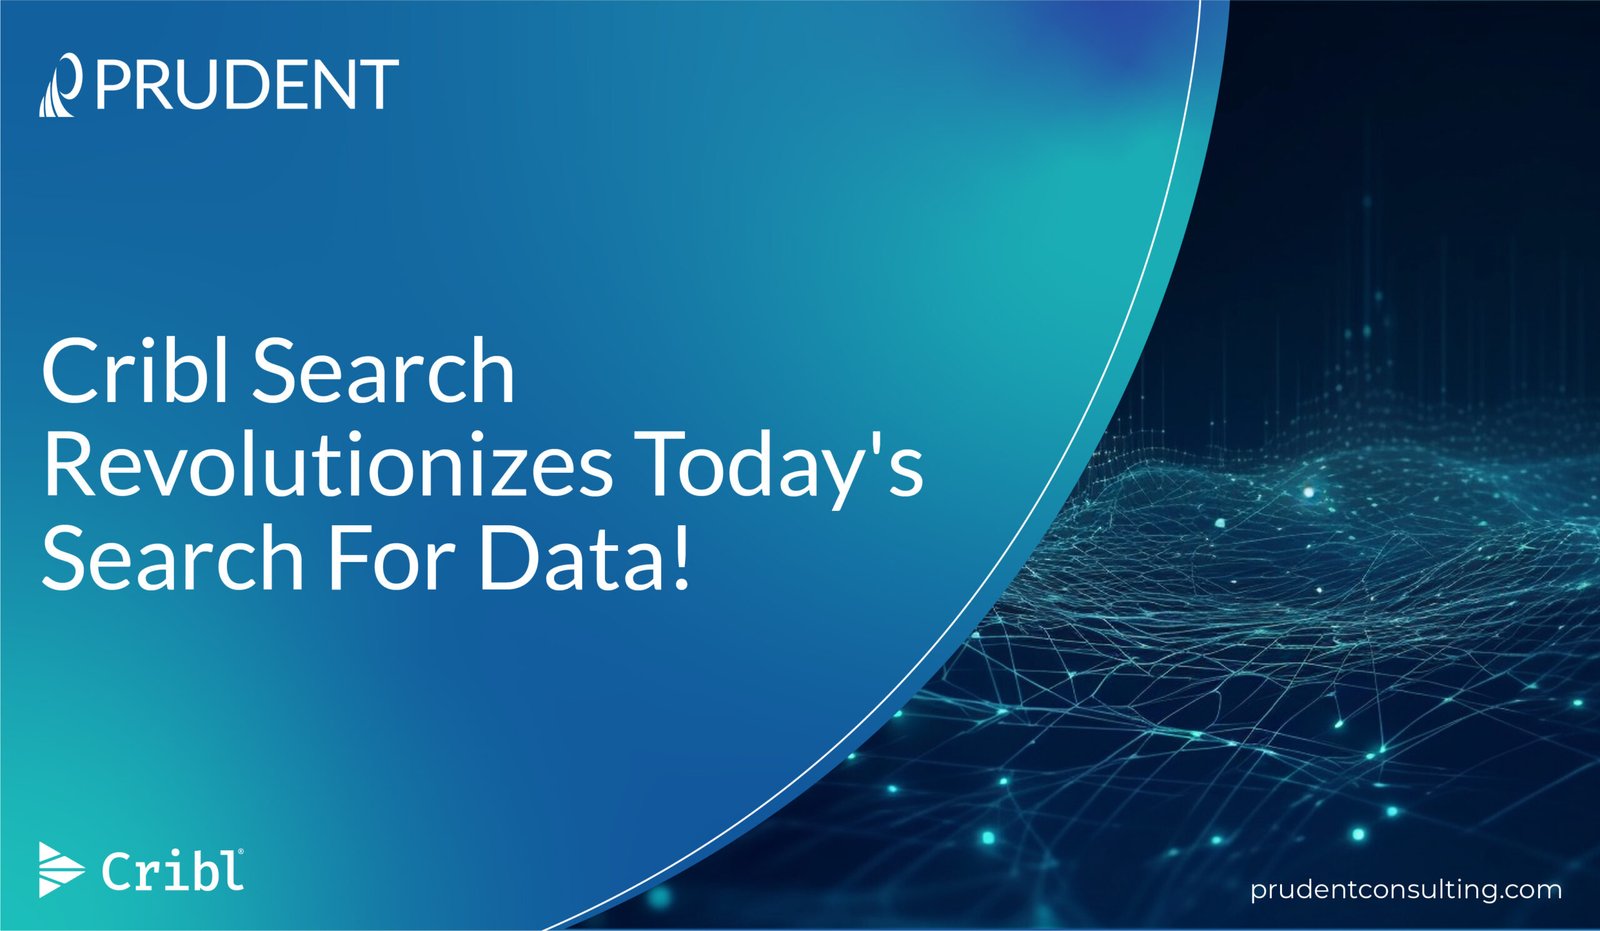 Cribl Search Revolutionizes Today's Search For Data!